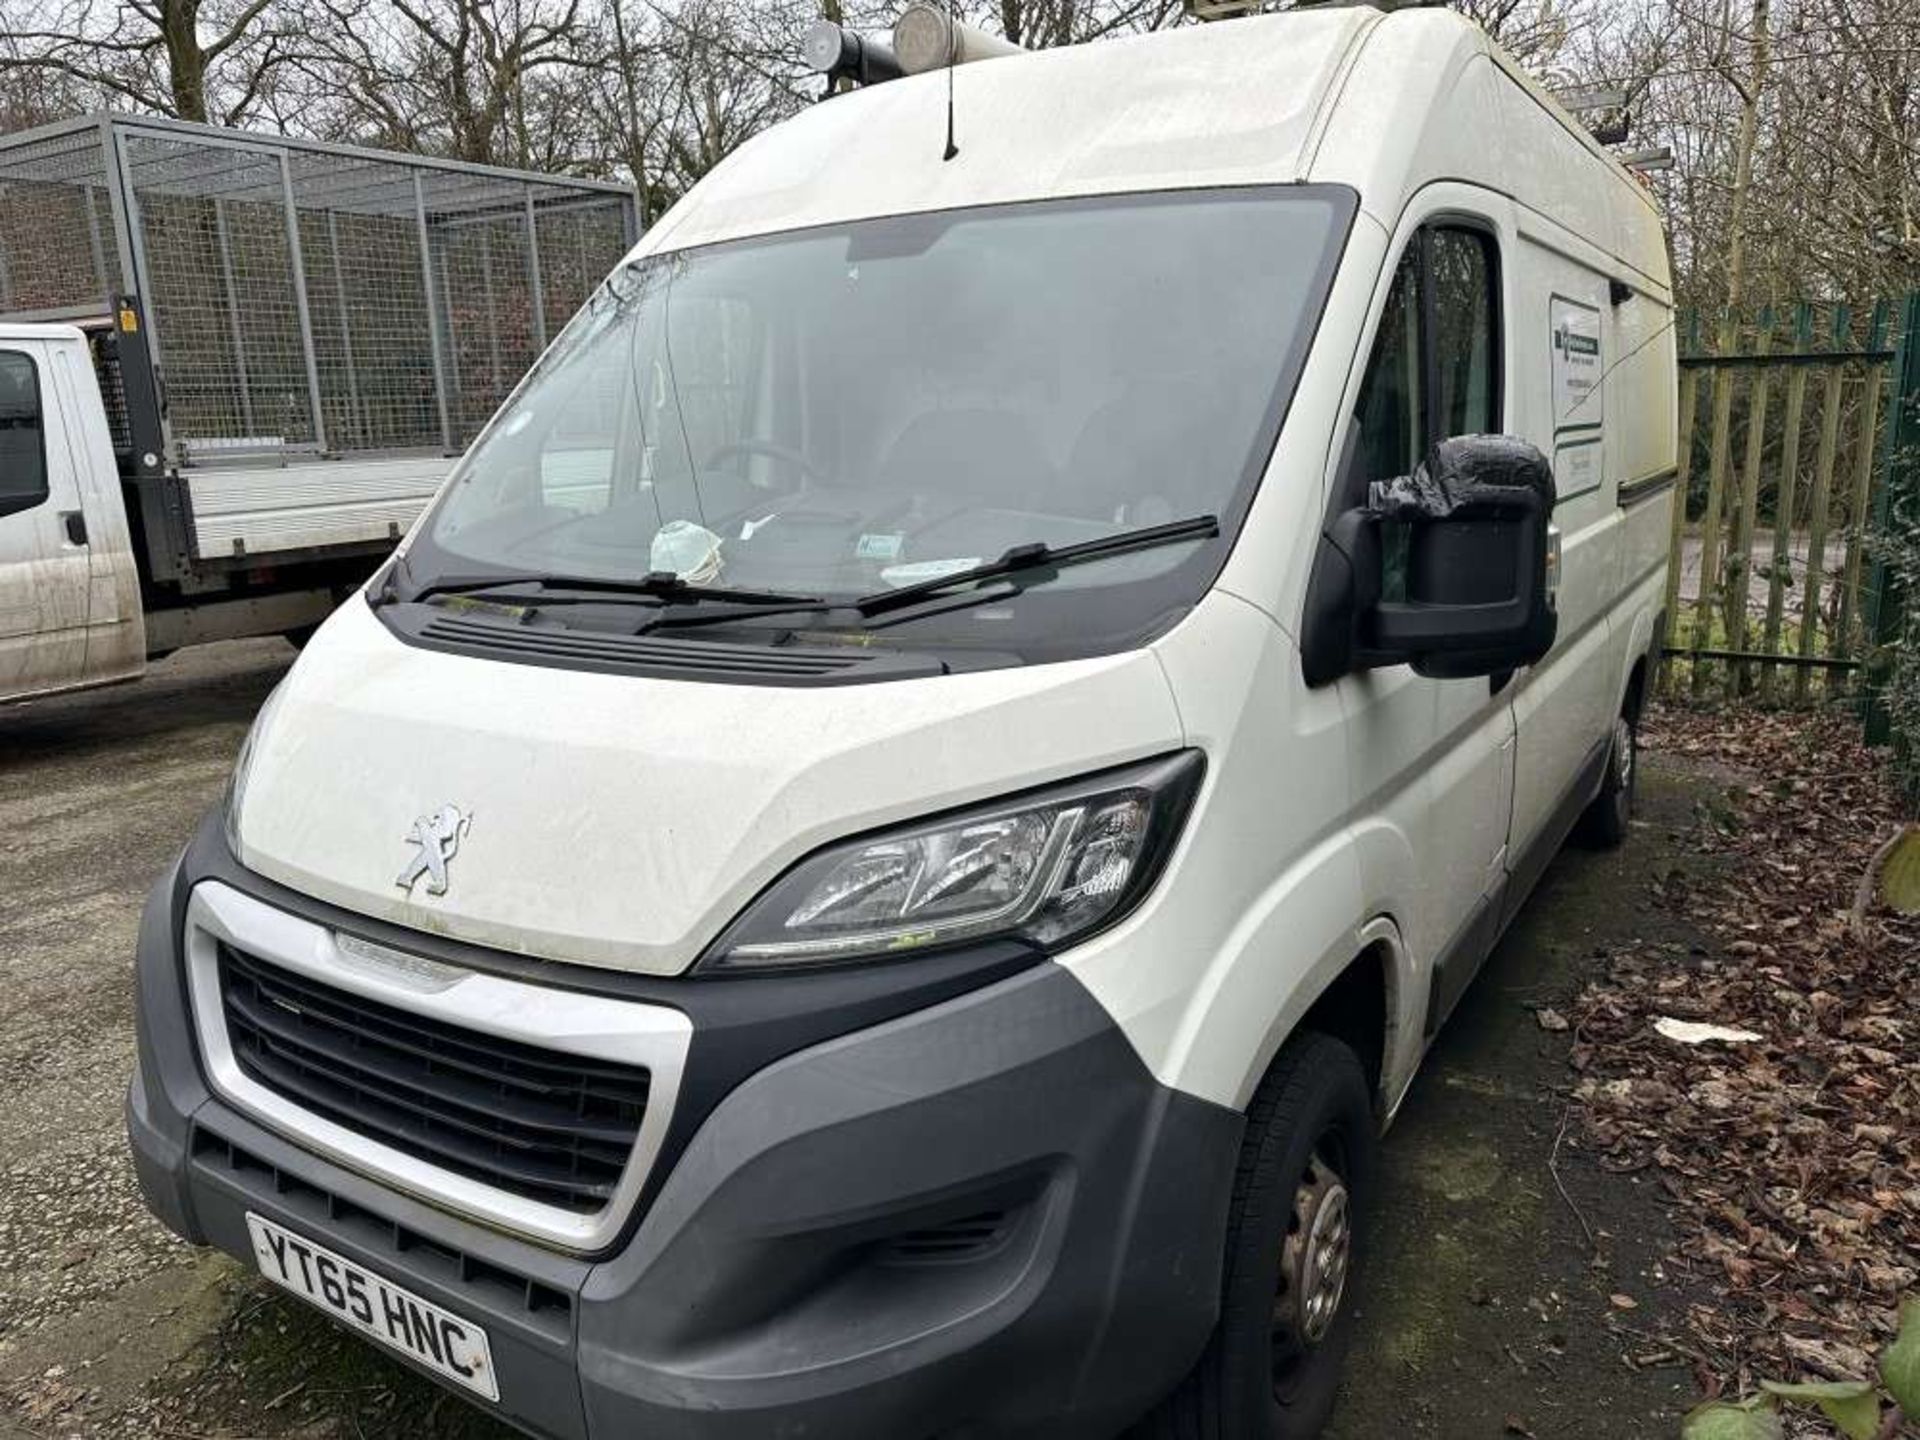 2015 65 reg Peugeot Boxer 335 L2H2 HDI (Brakes maybe stuck on) (Sold on Site - Location Leek) (Direc - Image 2 of 5